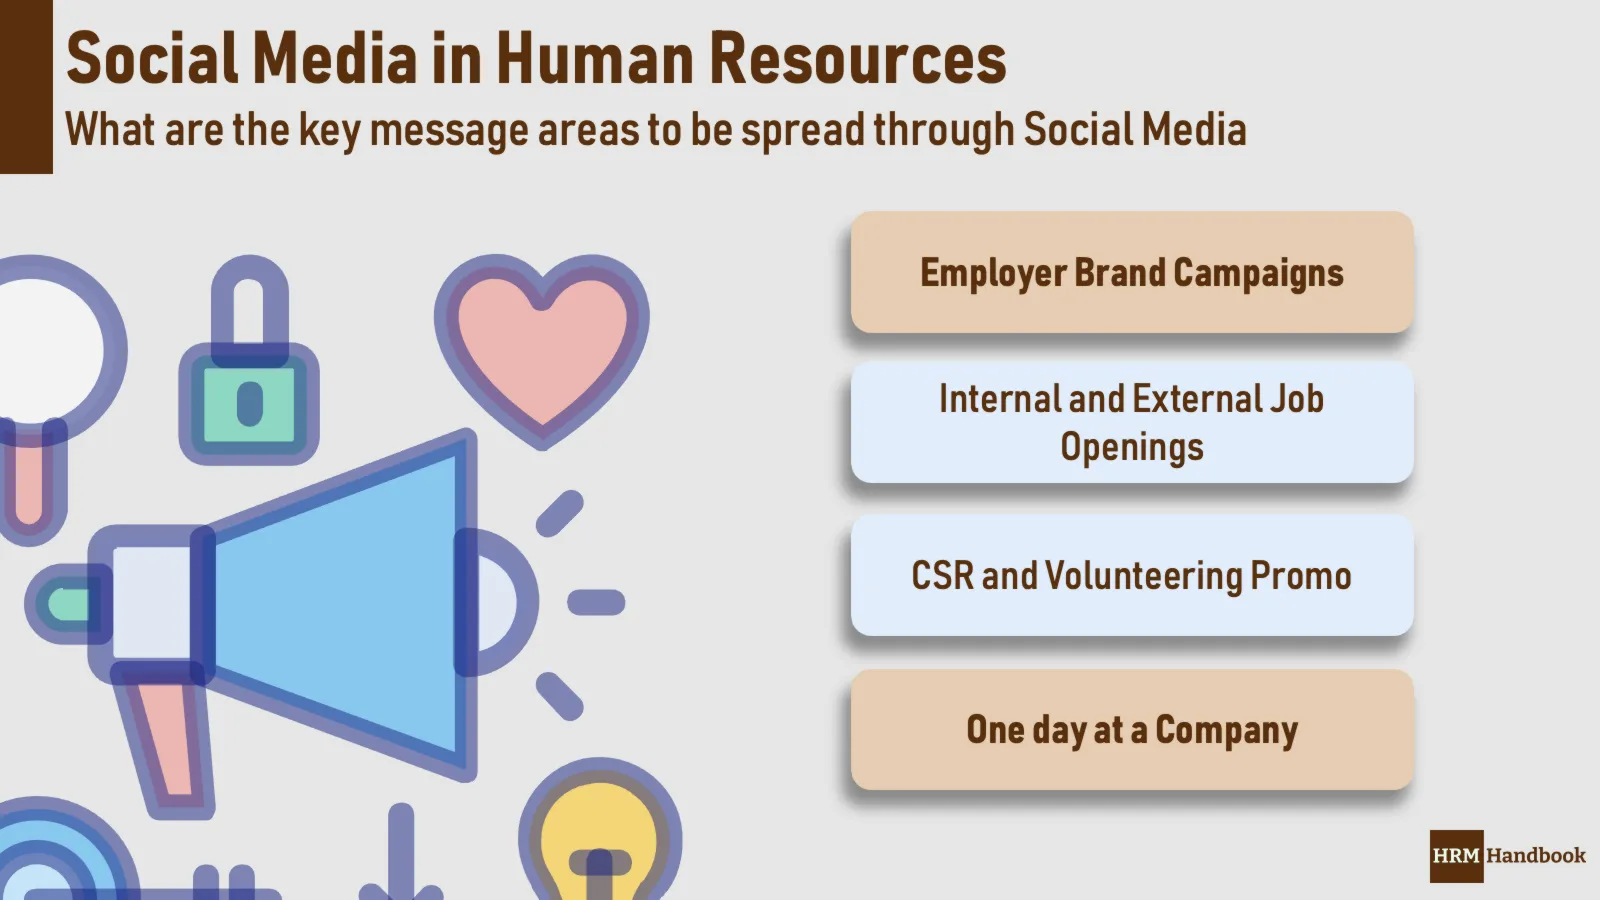 How Social Media increase impact of HR Management